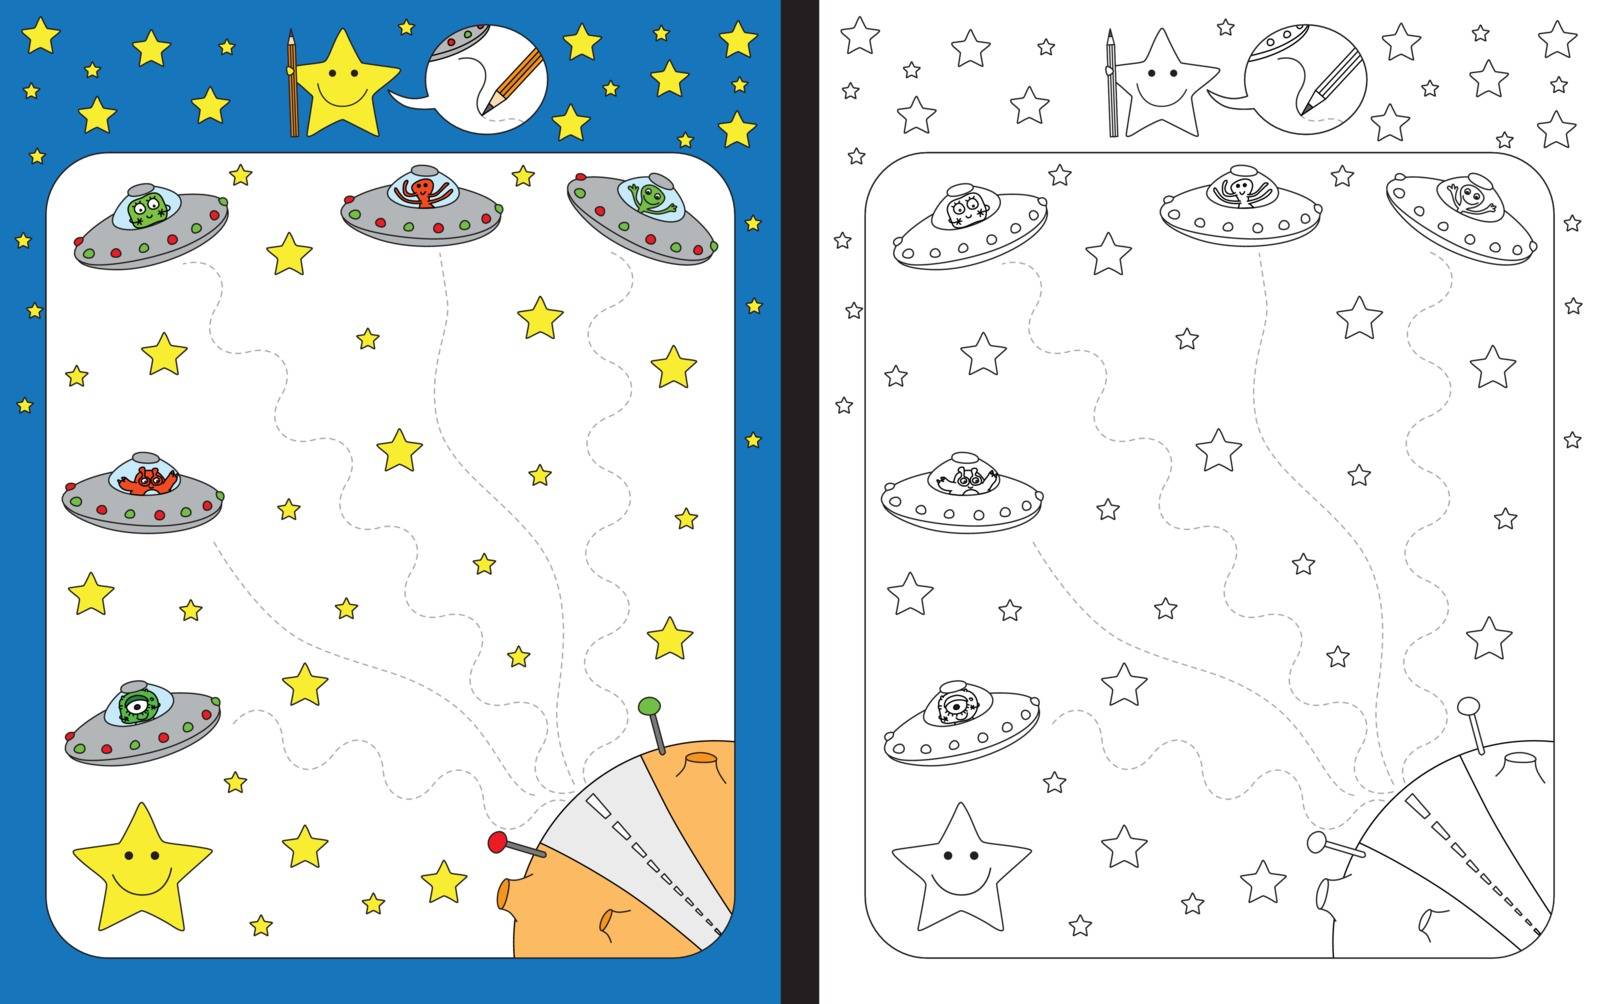 Preschool worksheet for practicing fine motor skills - tracing dashed lines of alien space ships landing on a planet